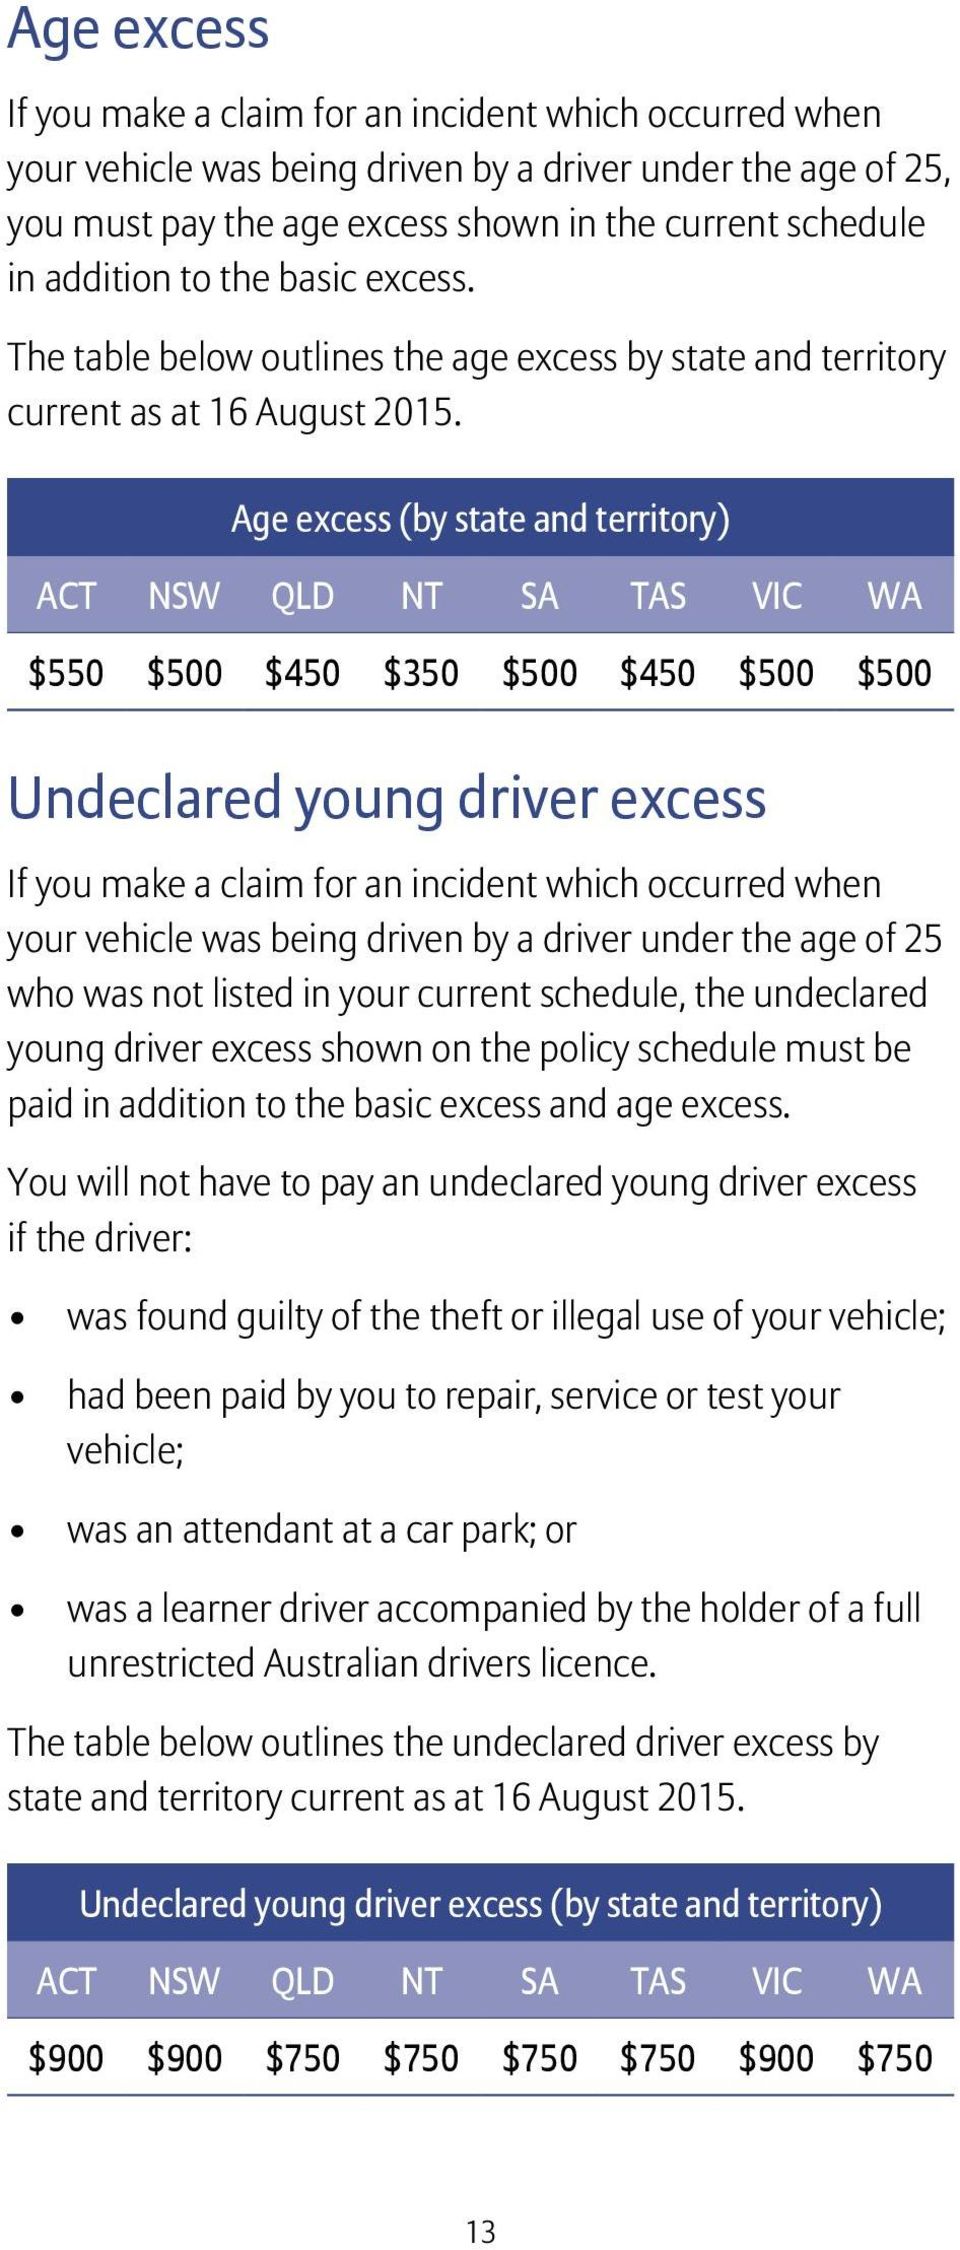 Age excess (by state and territory) ACT NSW QLD NT SA TAS VIC WA $550 $500 $450 $350 $500 $450 $500 $500 Undeclared young driver excess If you make a claim for an incident which occurred when your